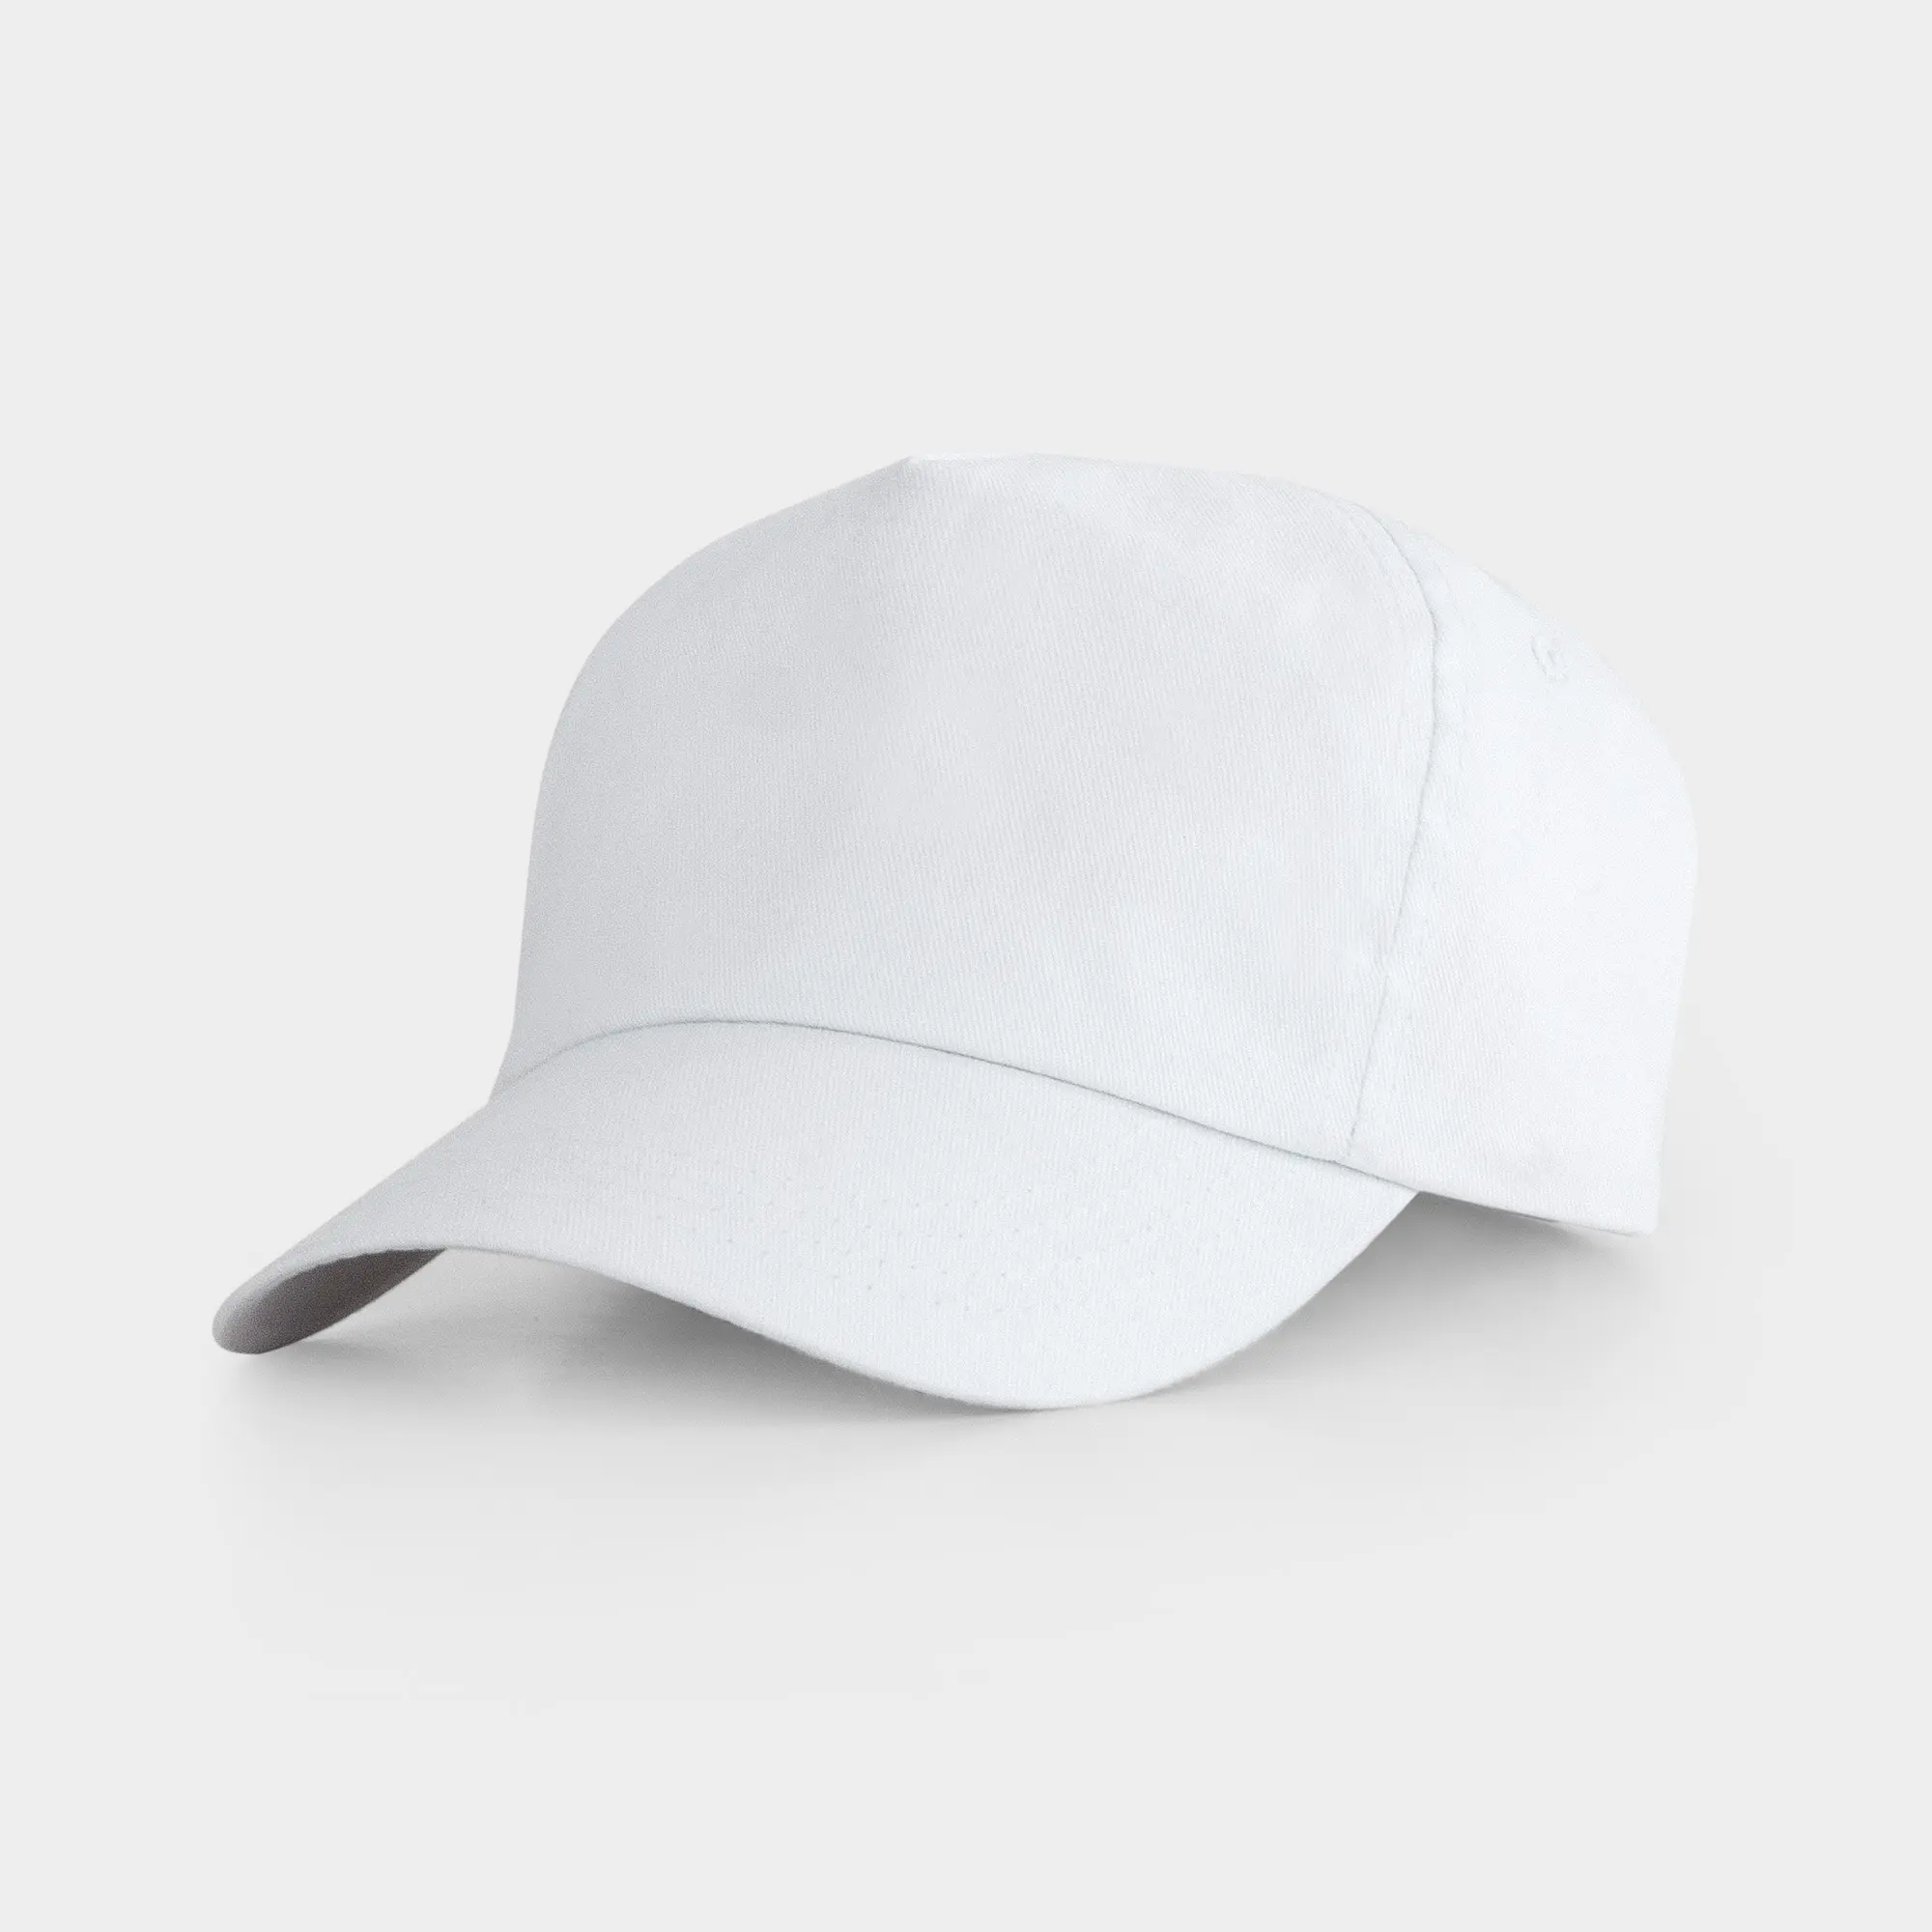 High Quality Personalized Custom Logo Hats Baseball Cap 6 Panel Embroidered 100 Cotton Unisex for Export